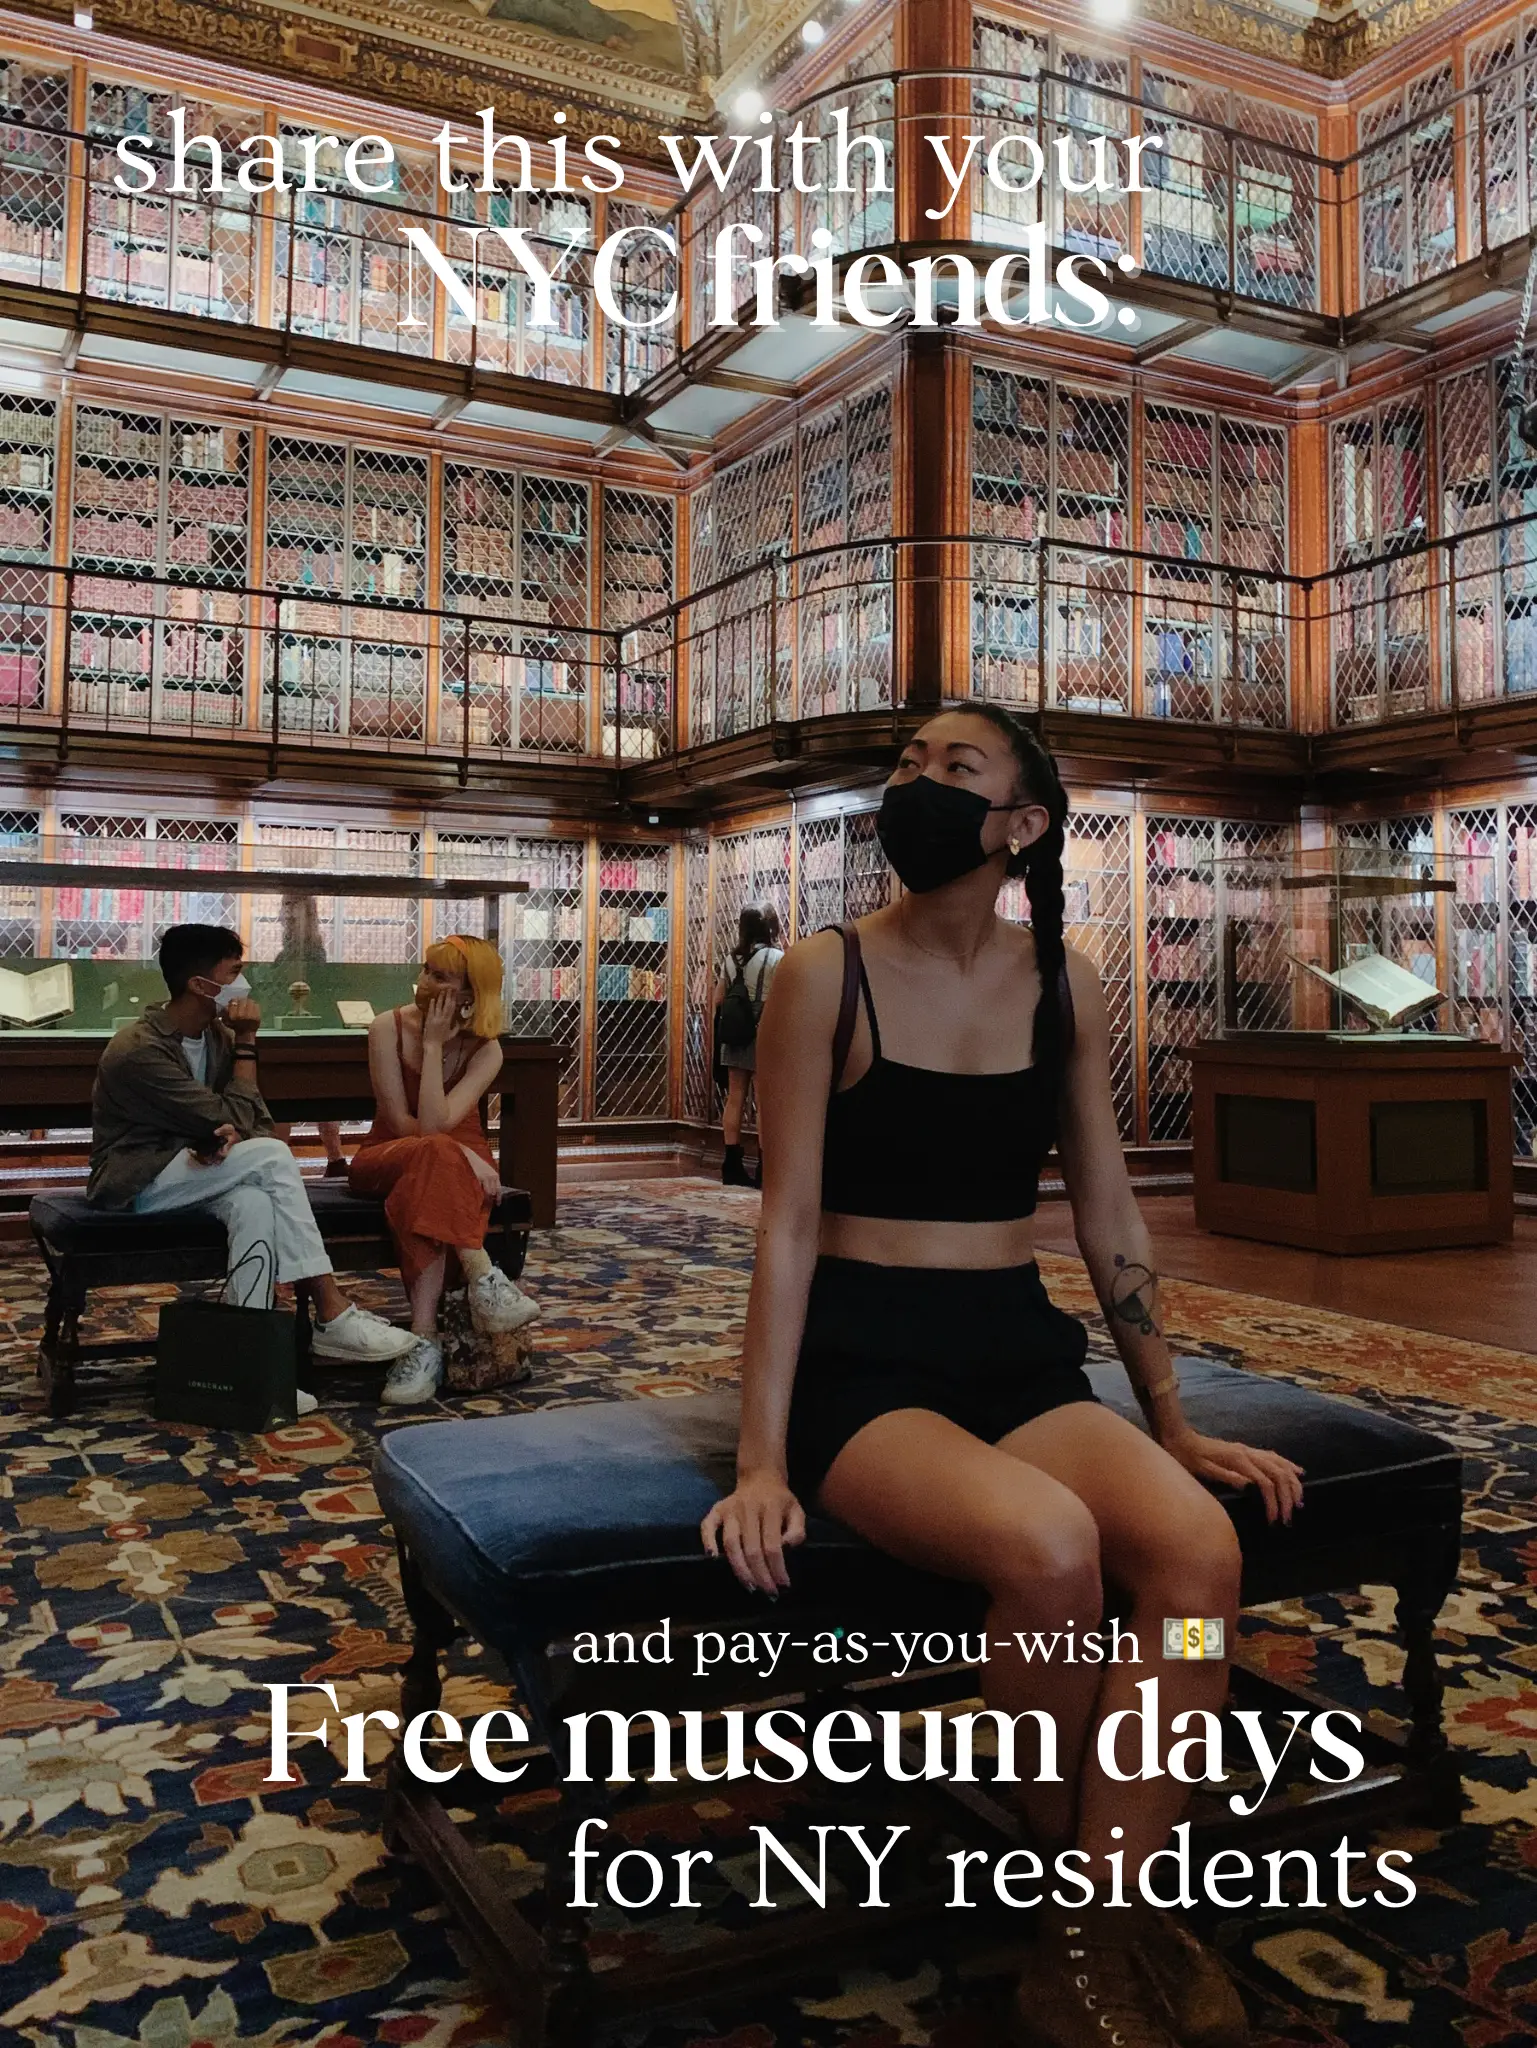 NYC friends 🙋🏻‍♀️ Free museum days for NY residents's images